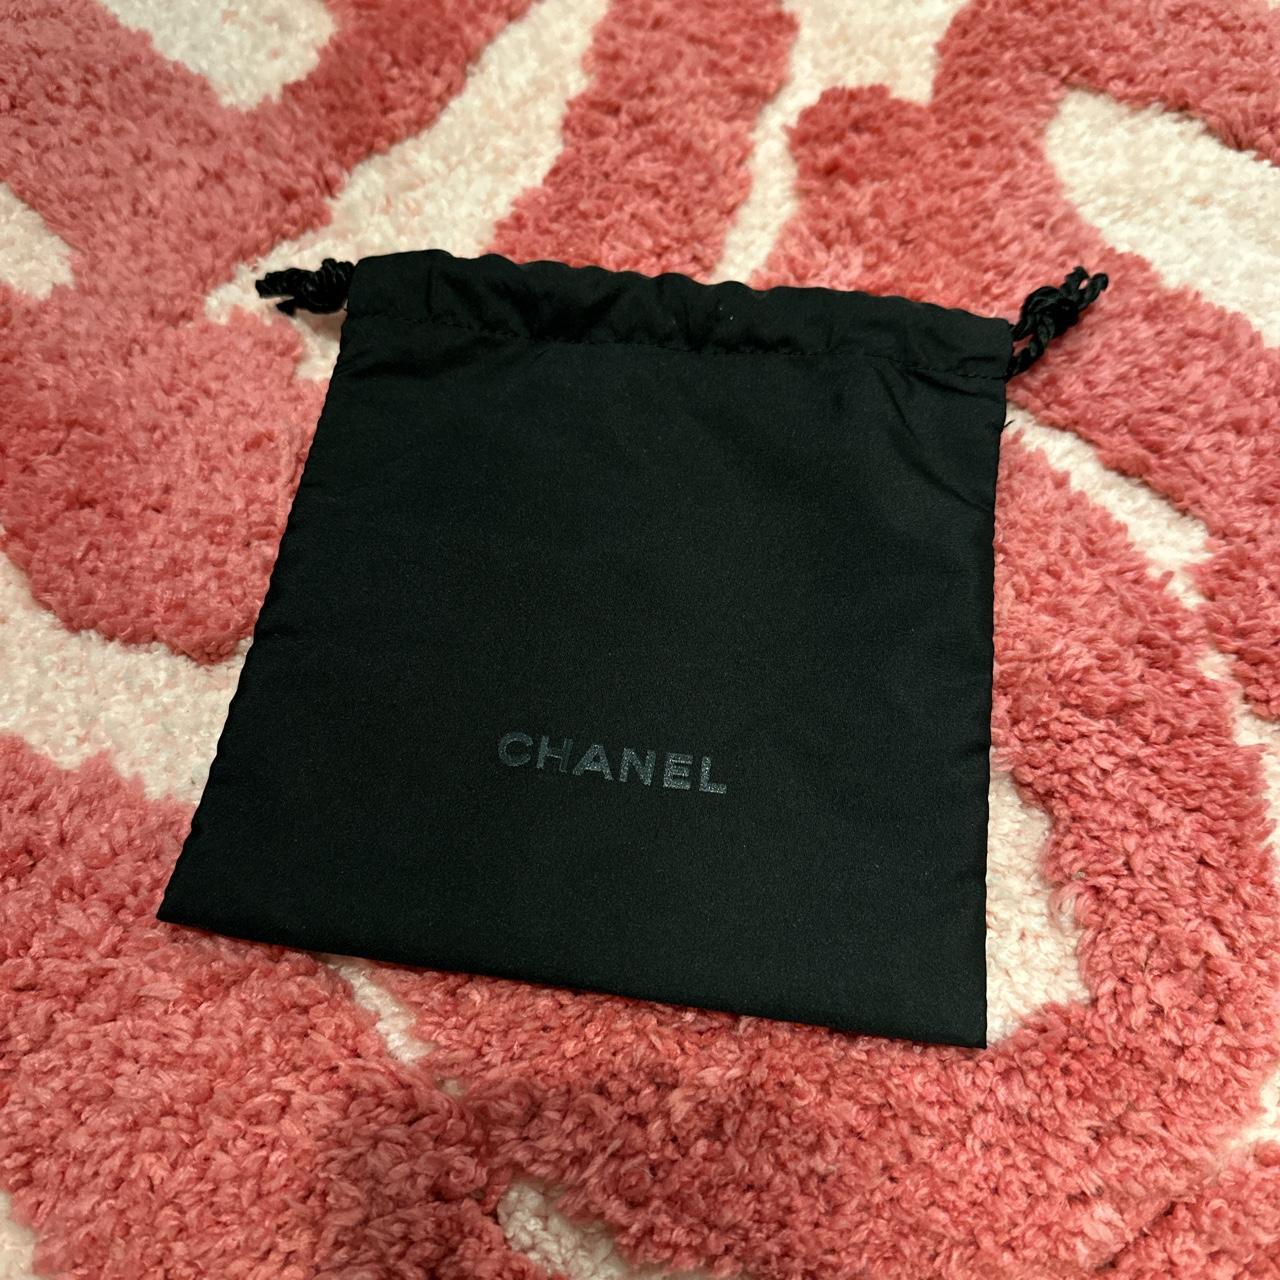 Chanel Shoe Dust Bag Covers in 2023  Chanel shoes, Clothes design, Bag  cover